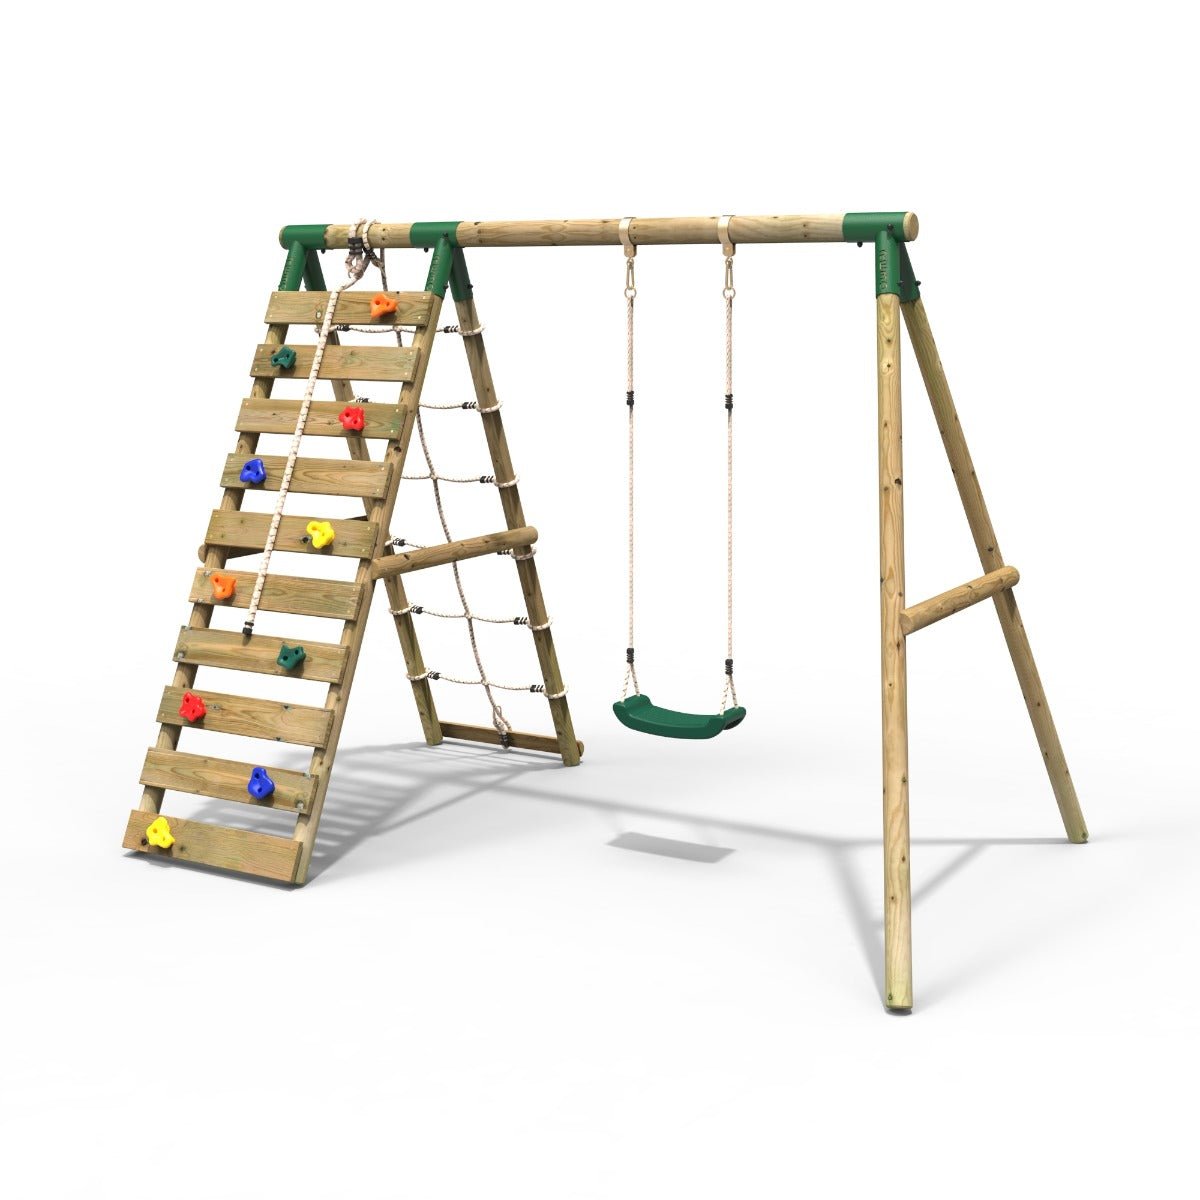 Rebo Wooden Swing Set with Up and Over Climbing Wall - Aria Green